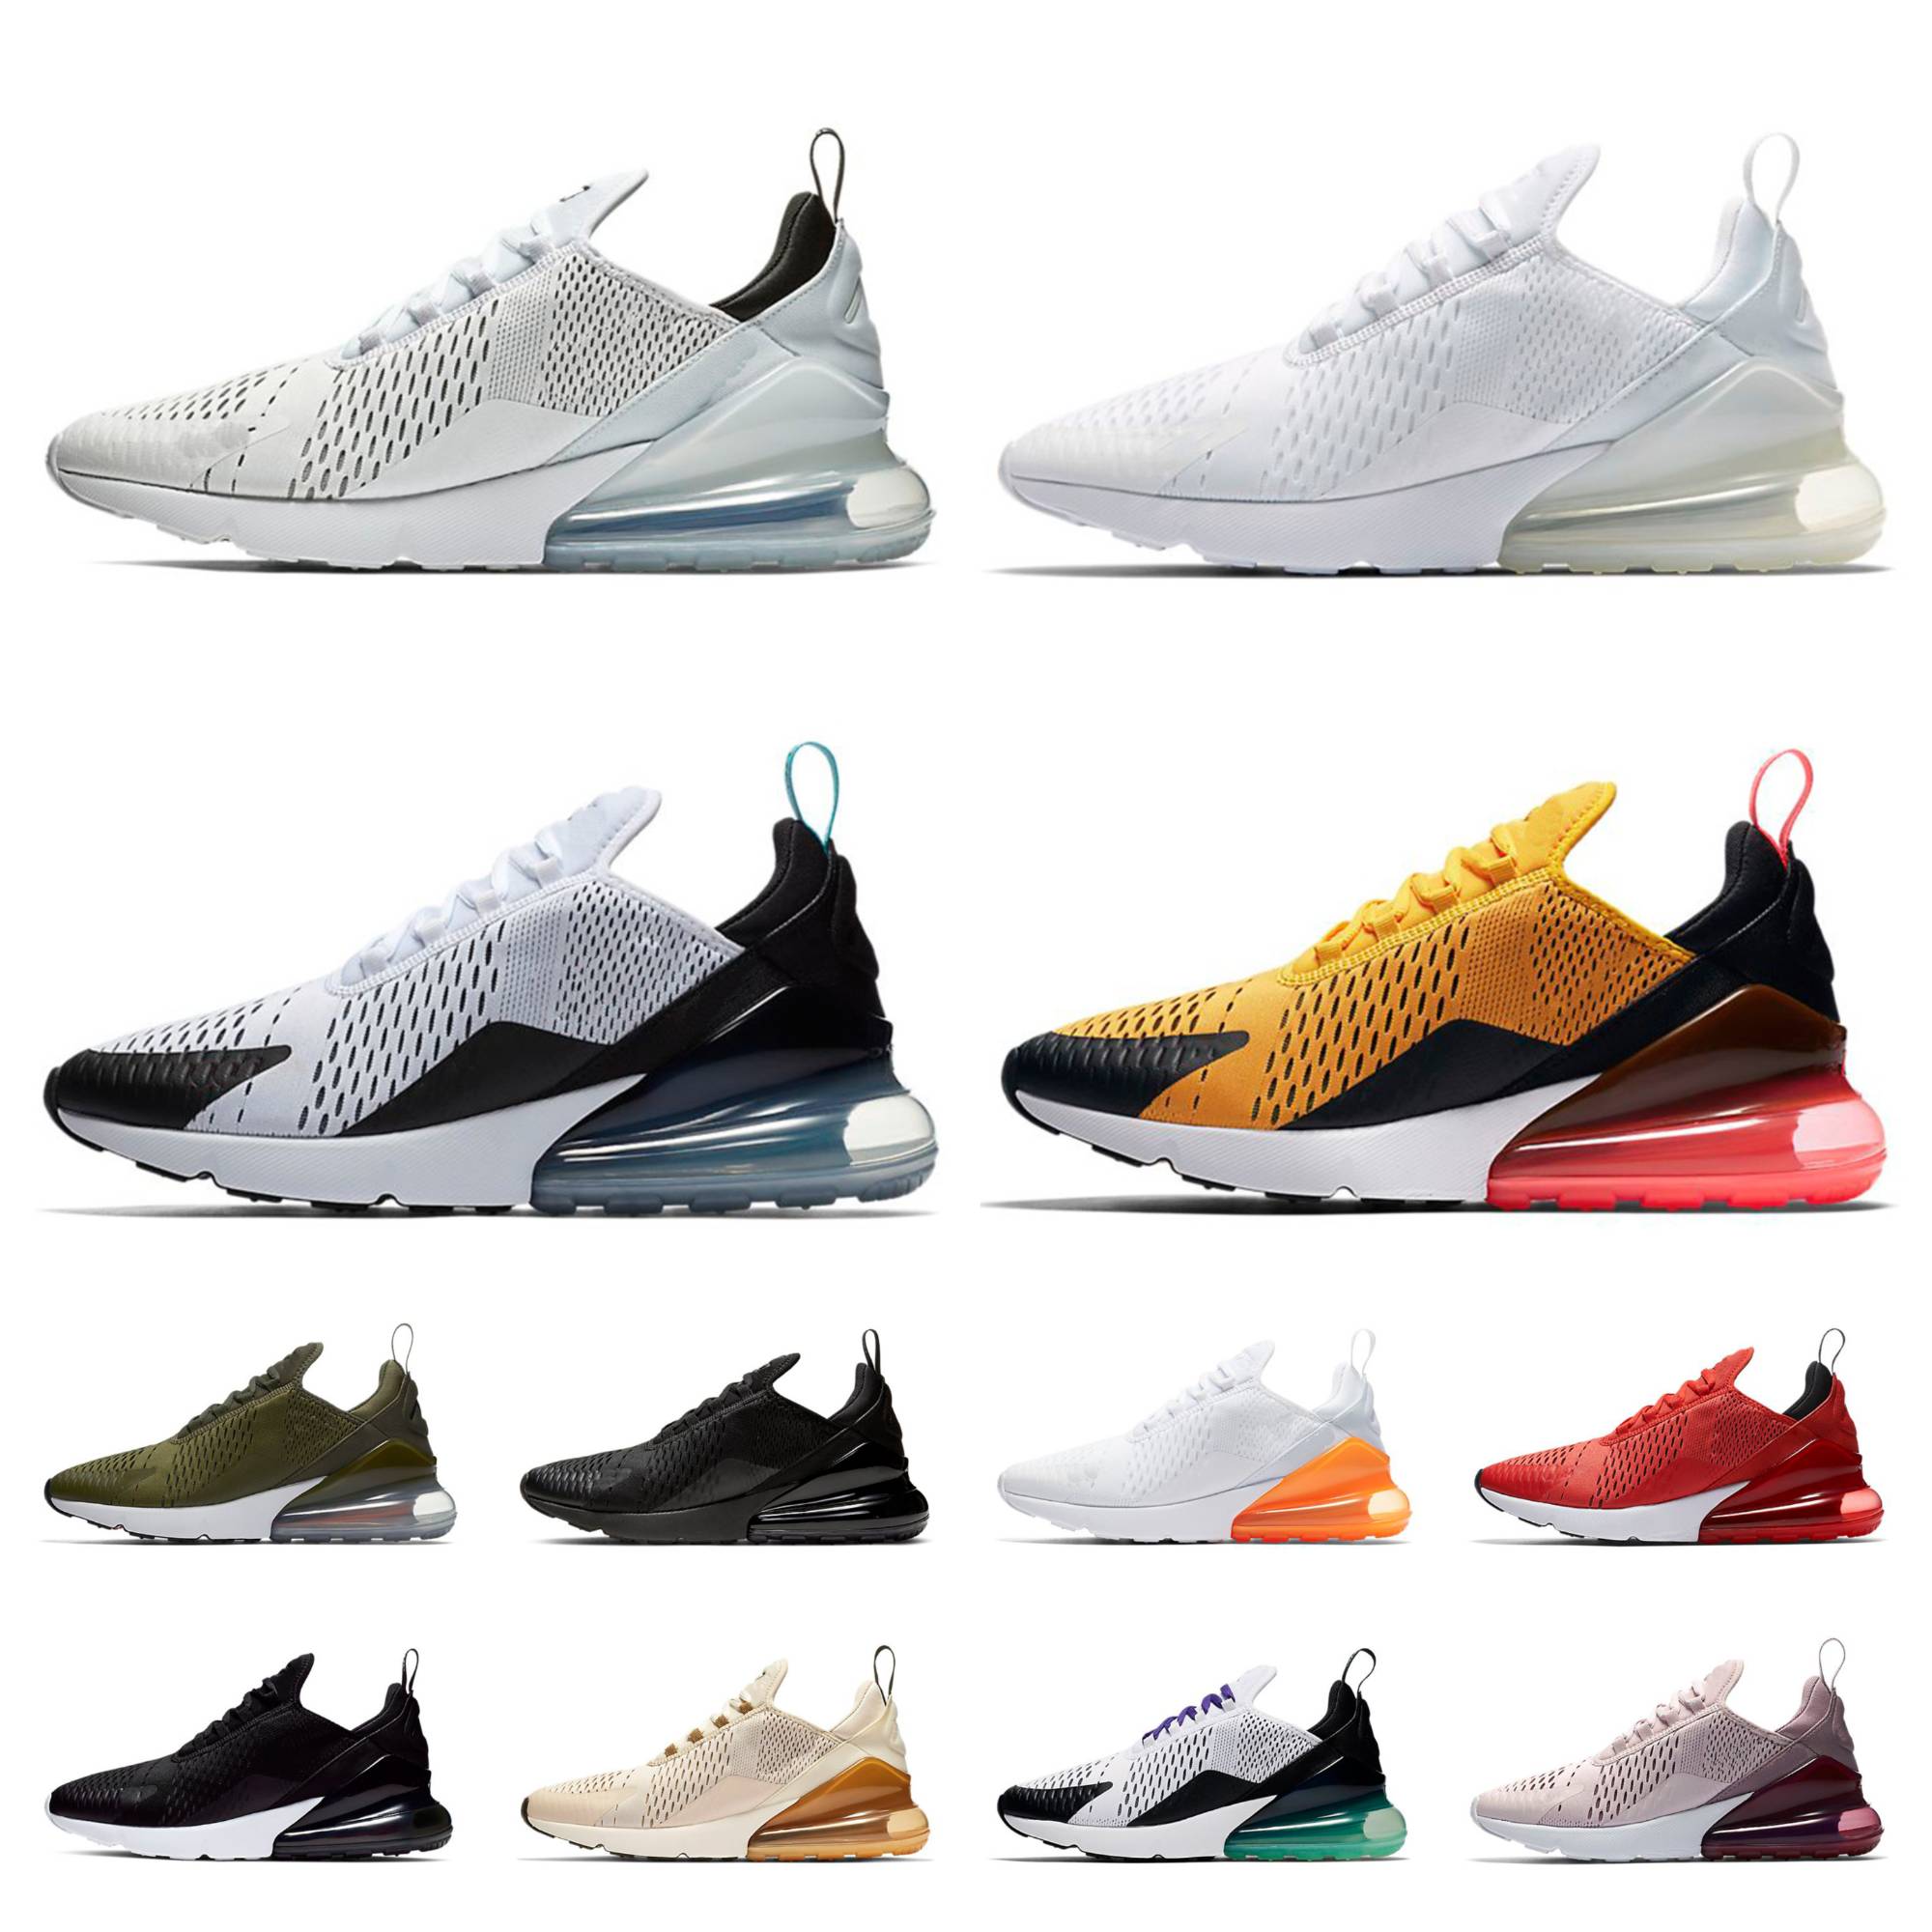 

2023 Max 270 Casual Shoes Air 270s React Triple Black White Royal Chaussure Bred Be True Metallic Gold Barely Rose Olive Dusty Cactus Midnight Navy Mens Women Sneakers, Shoes lace